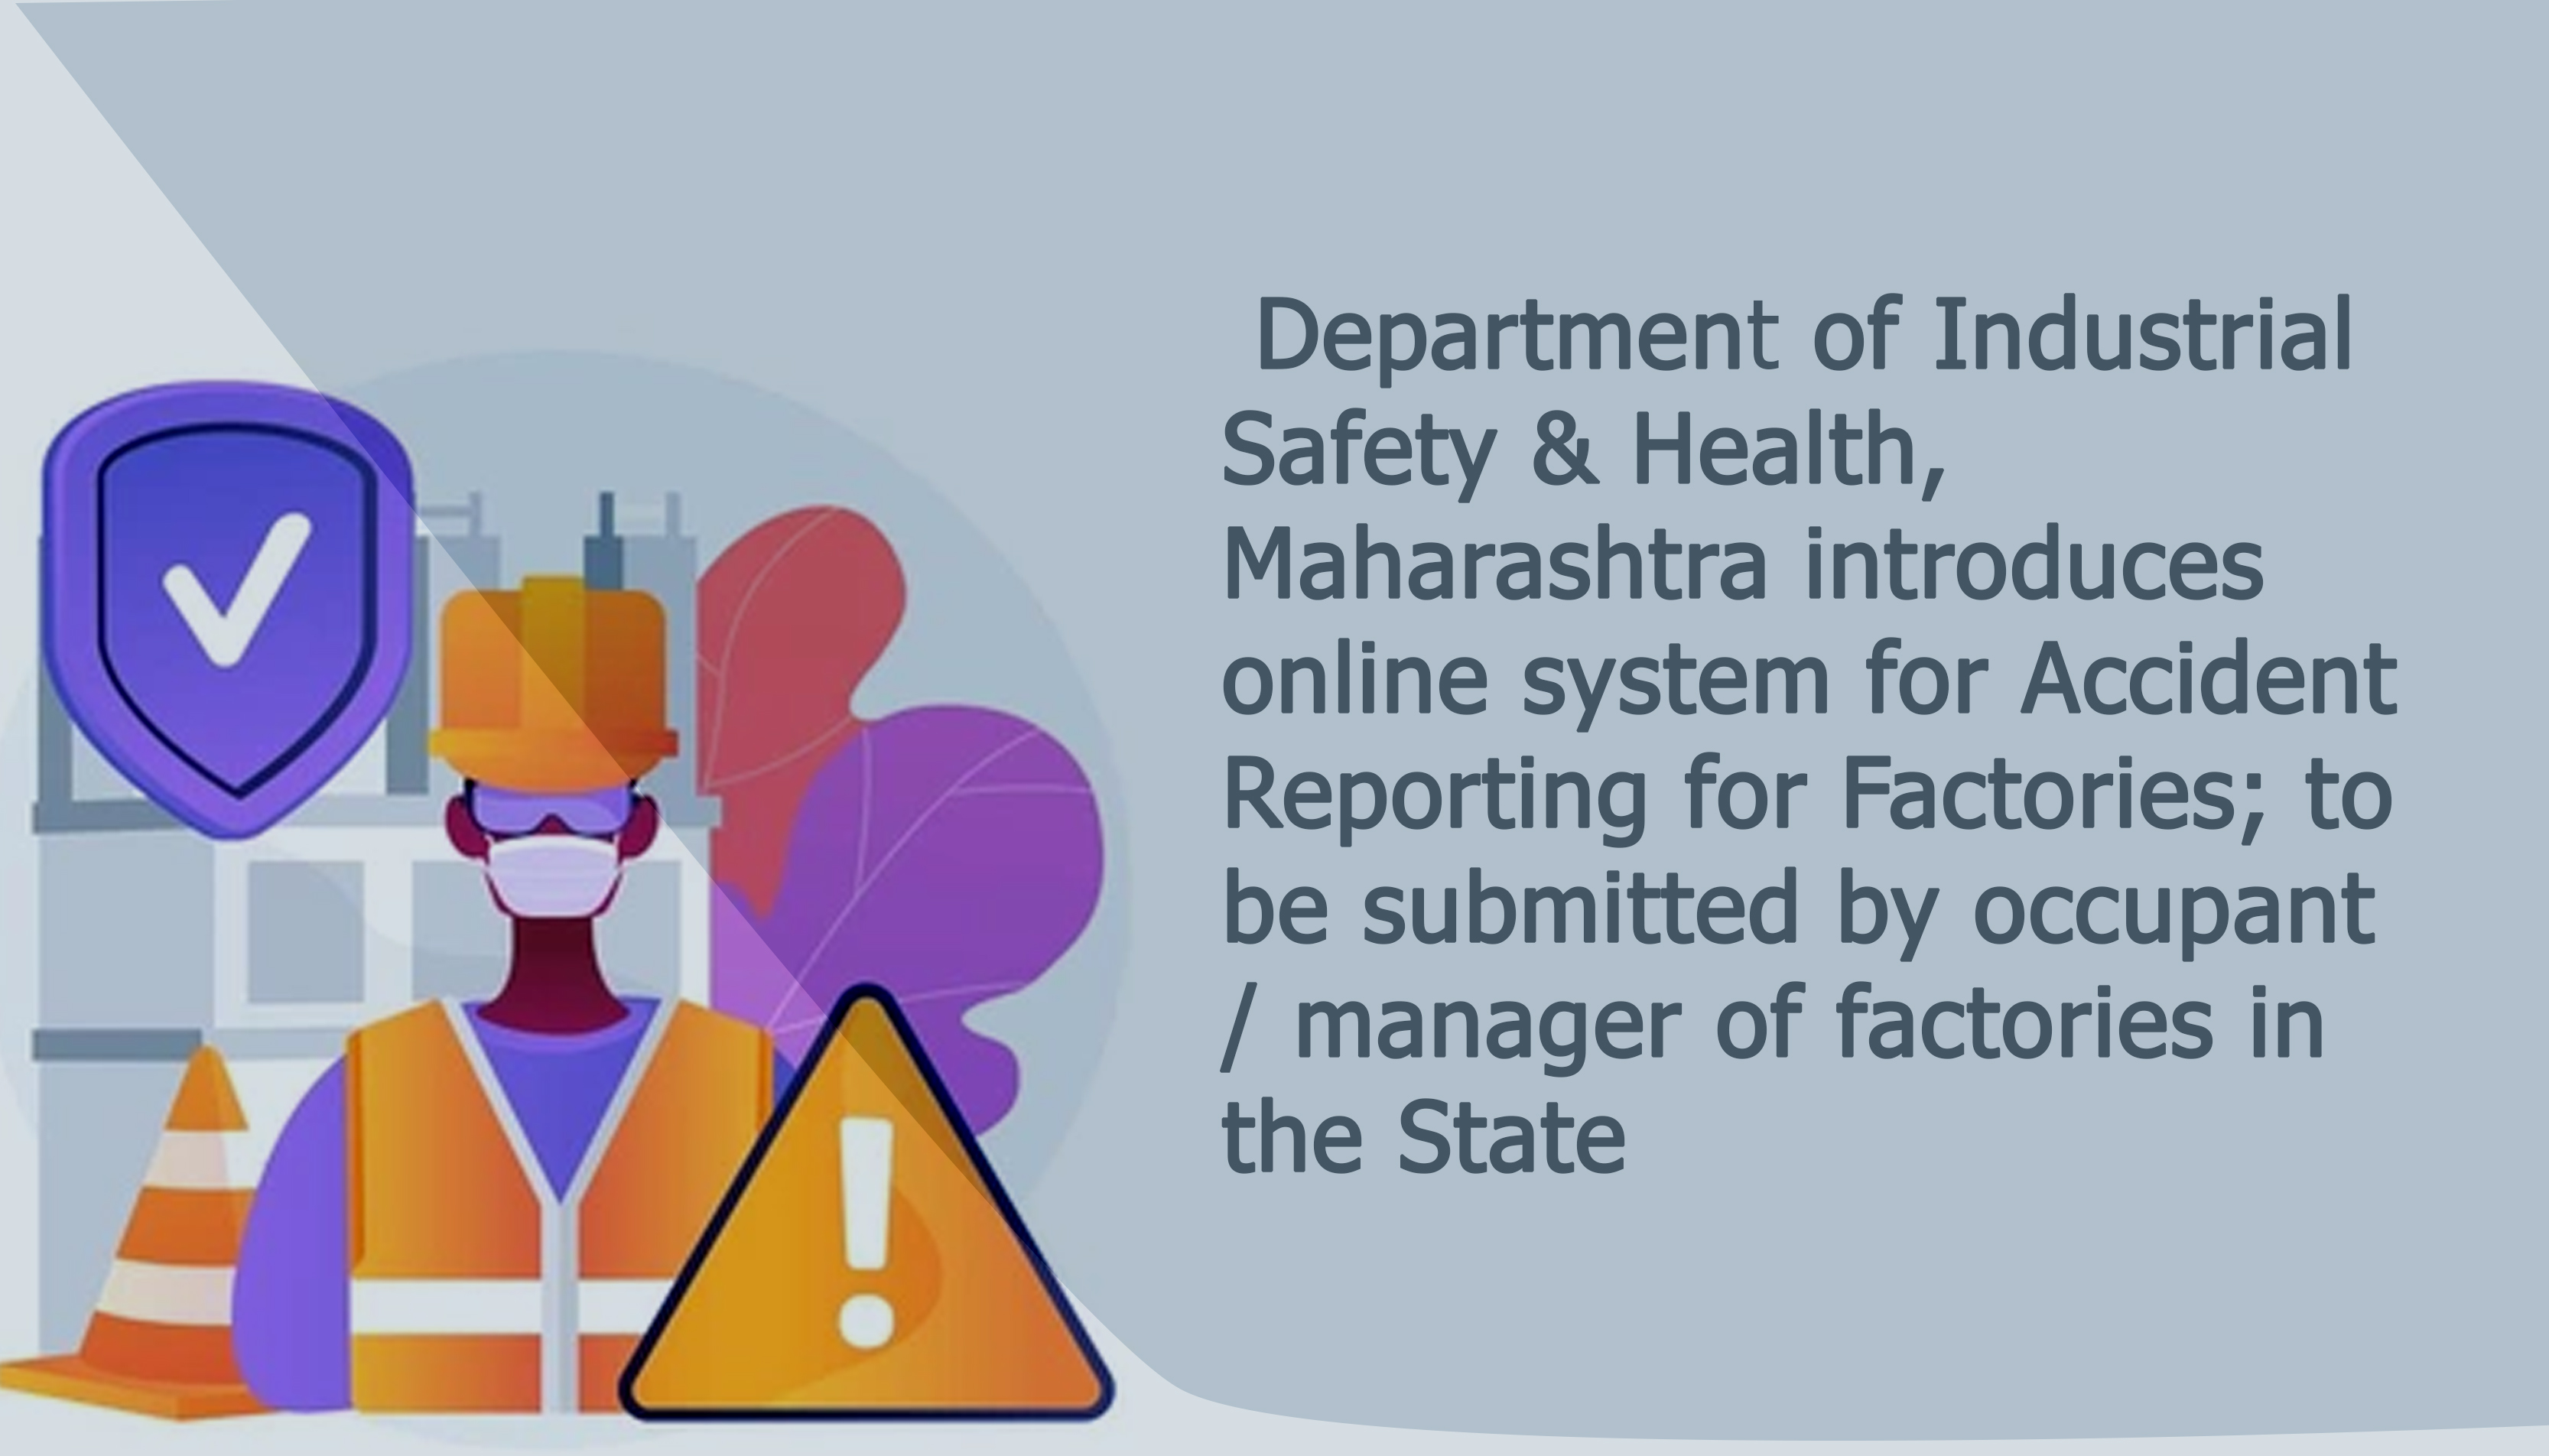 Department of Industrial Safety & Health, Maharashtra introduces online system for Accident Reporting for Factories; to be submitted by occupant / manager of factories in the State